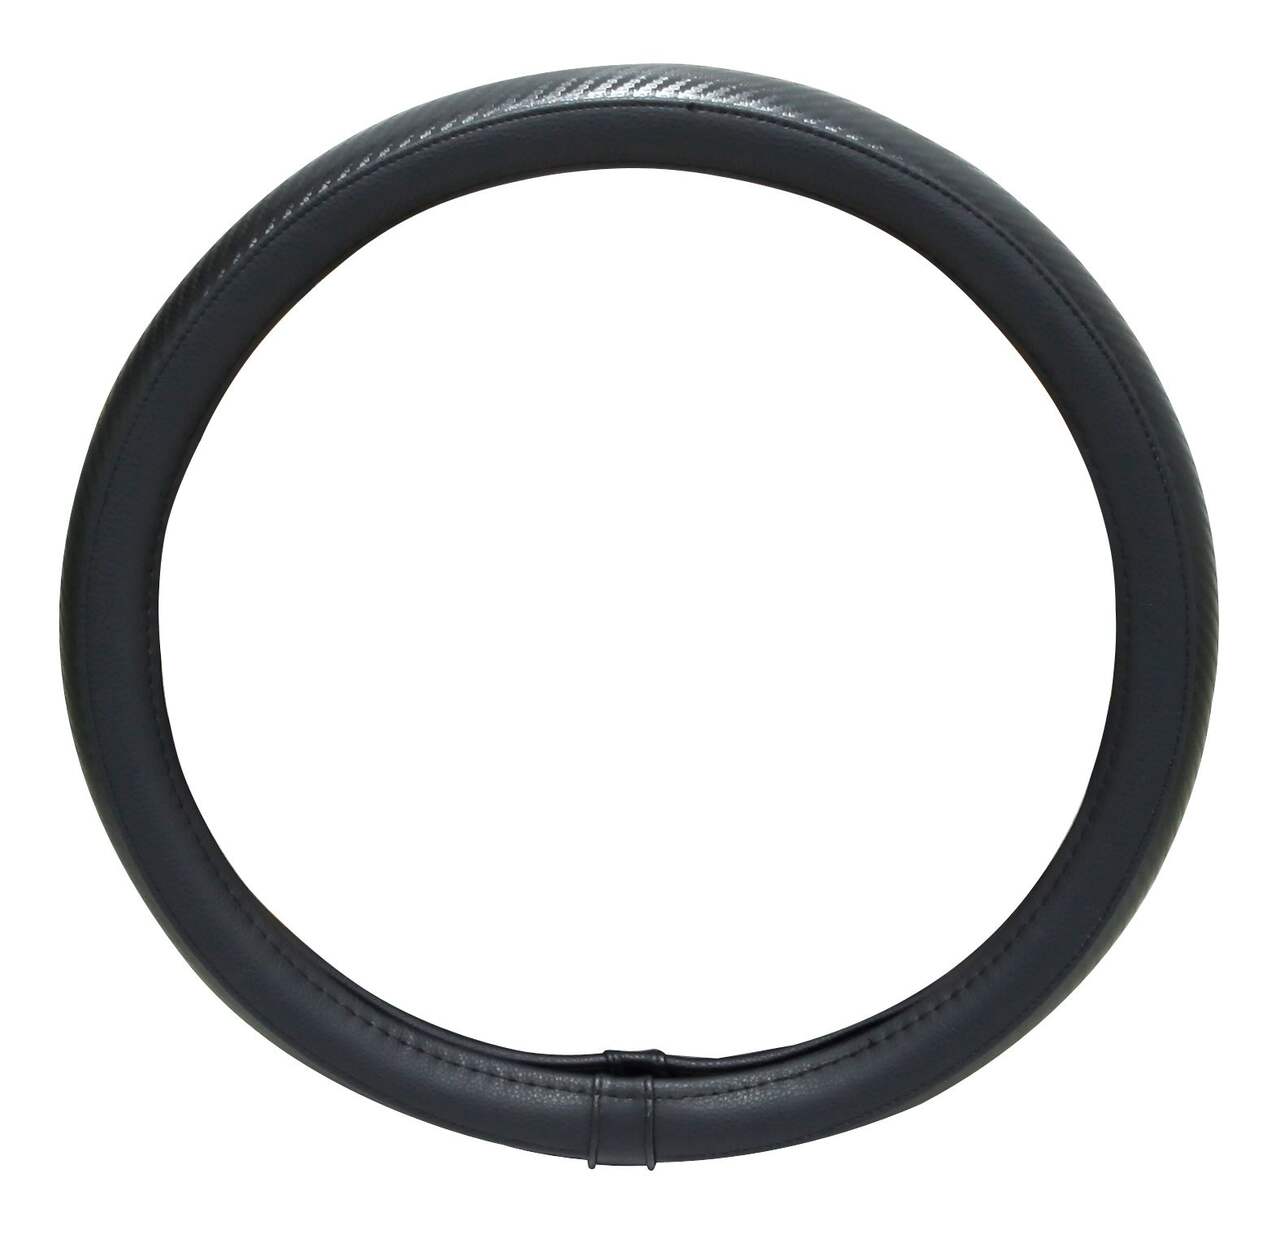 https://media-www.canadiantire.ca/product/automotive/car-care-accessories/auto-comfort/0324488/autotrends-carbon-fibre-steering-wheel-cover-b12d9f87-9e3e-46f9-b59b-c9650b013f21-jpgrendition.jpg?imdensity=1&imwidth=1244&impolicy=mZoom